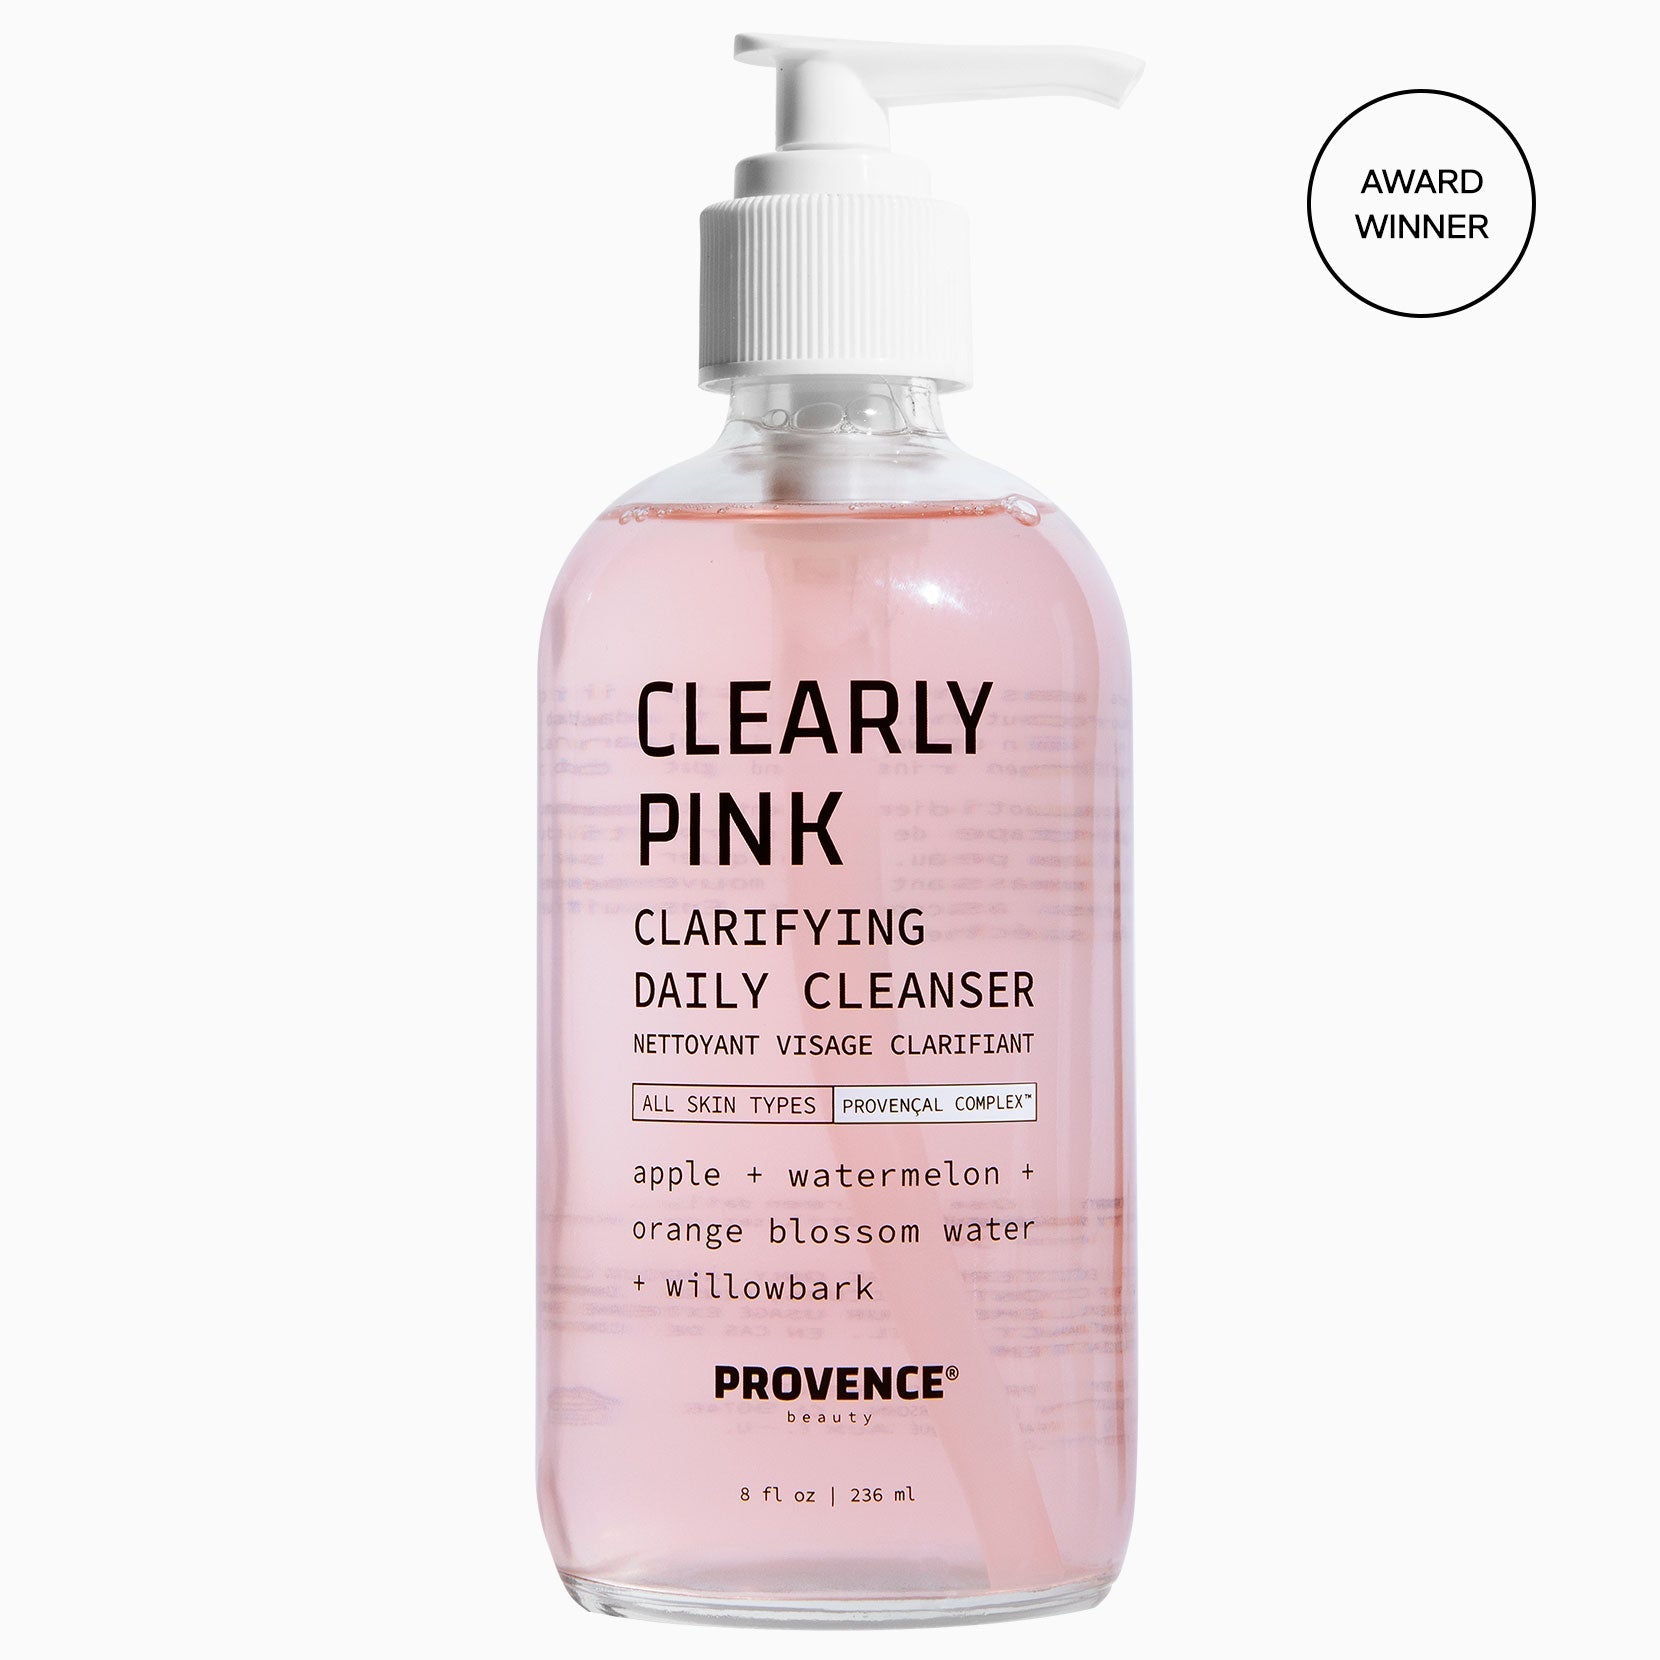 FINAL_ProductShot_Unboxed_ClearlyPink_321-SEAL-PDP-CROP-1660_461c1855-a8b5-4958-8b8f-0457d46c5ce7.jpg